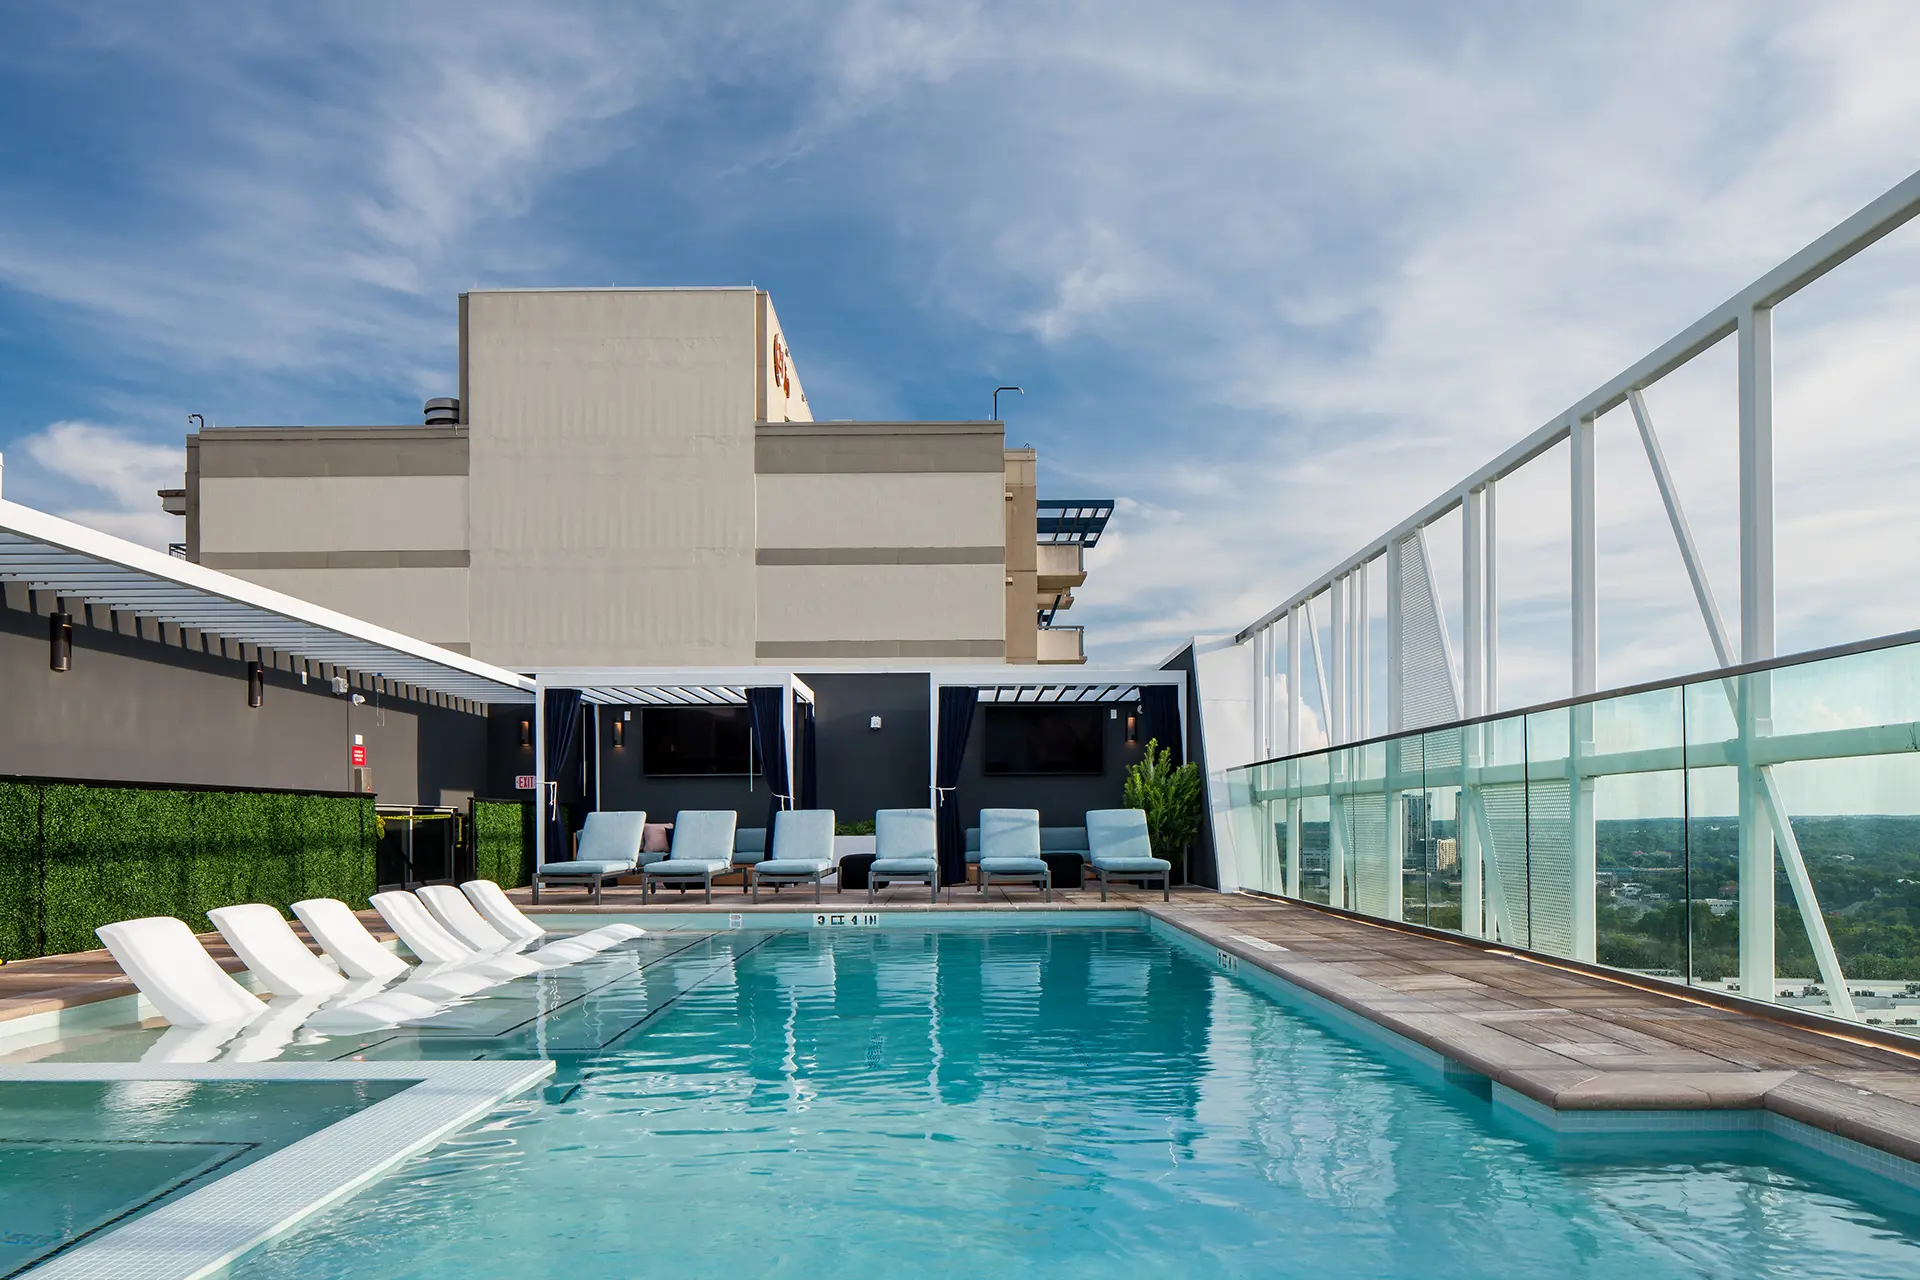 rooftop pool with lounge seating in shallow deck and pergola seating with large TVs.